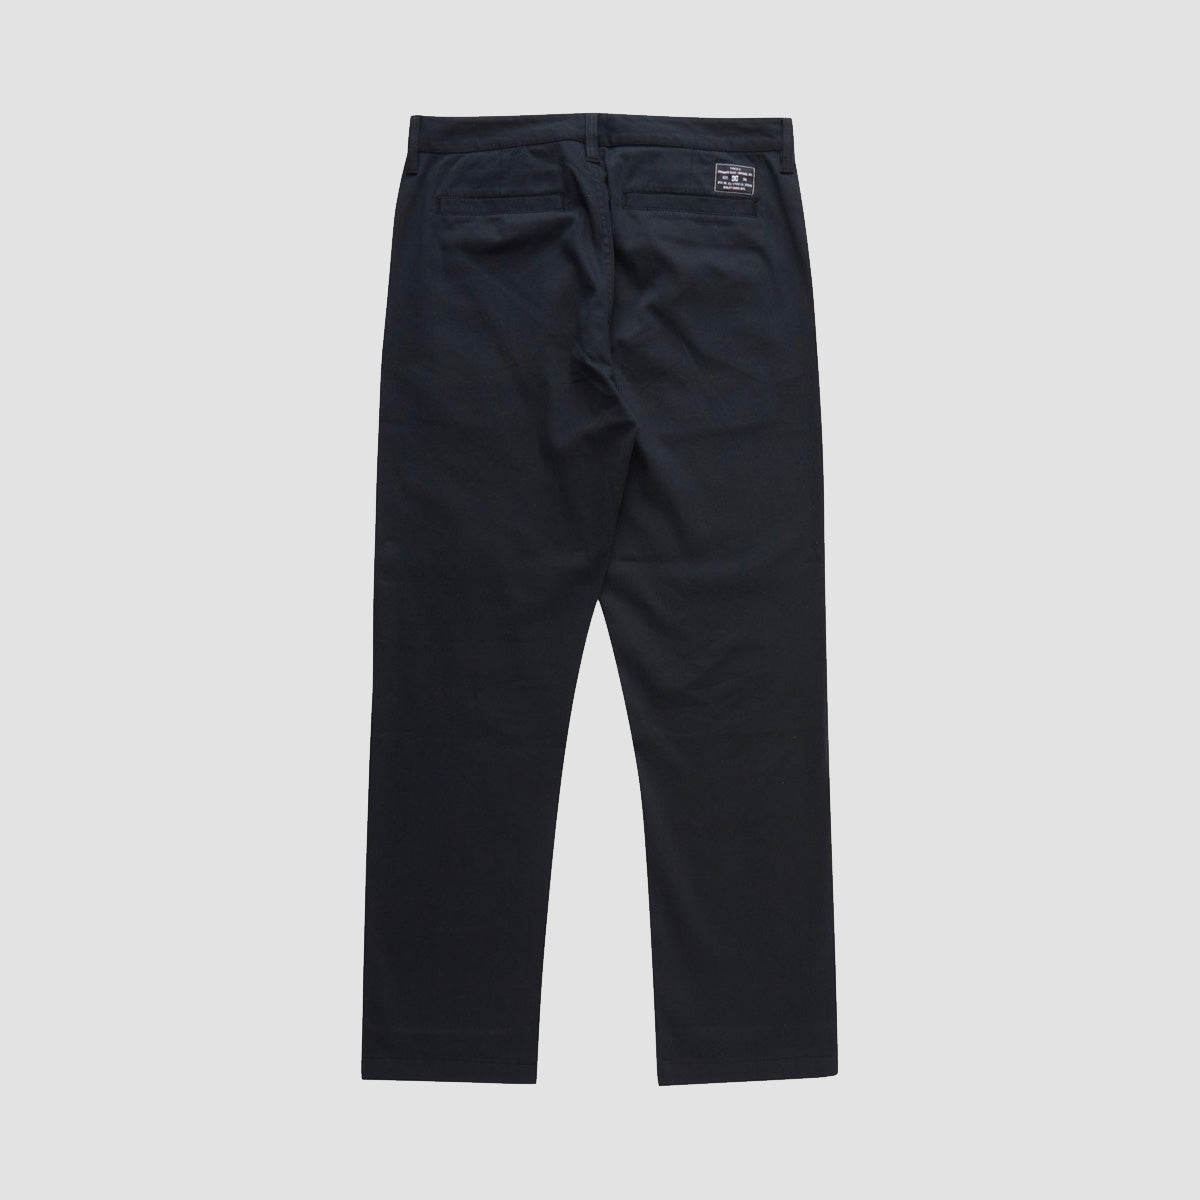 DC Worker Relaxed Fit Chino Pants Black